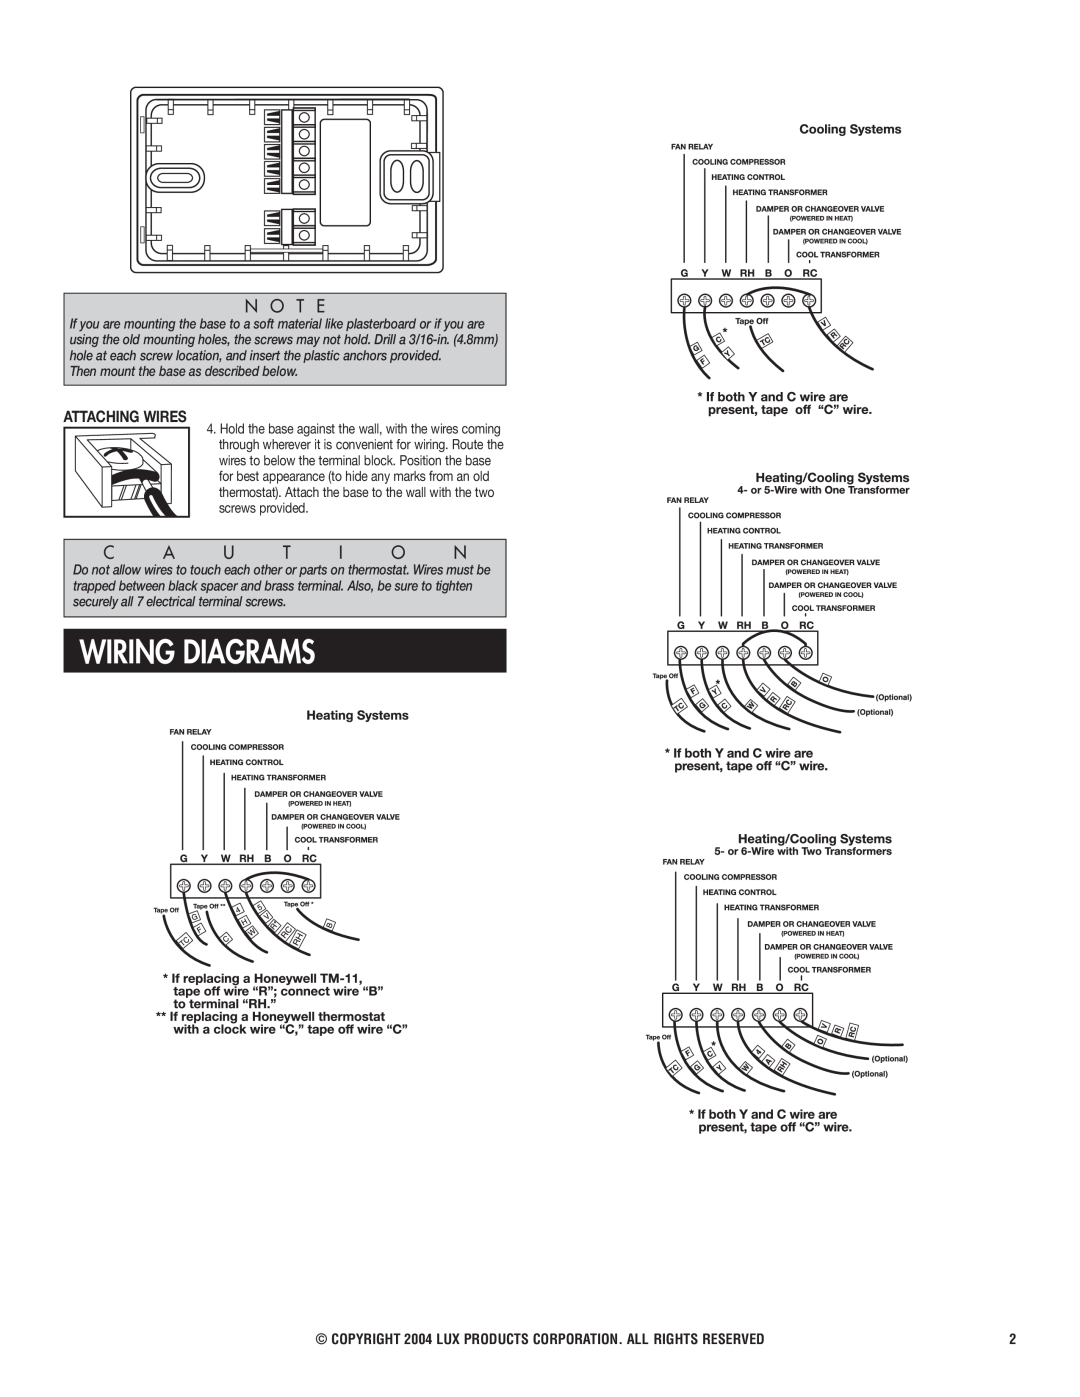 Lux Products DMH100 Series Wiring Diagrams, N O T E, Attaching Wires, Then mount the base as described below 